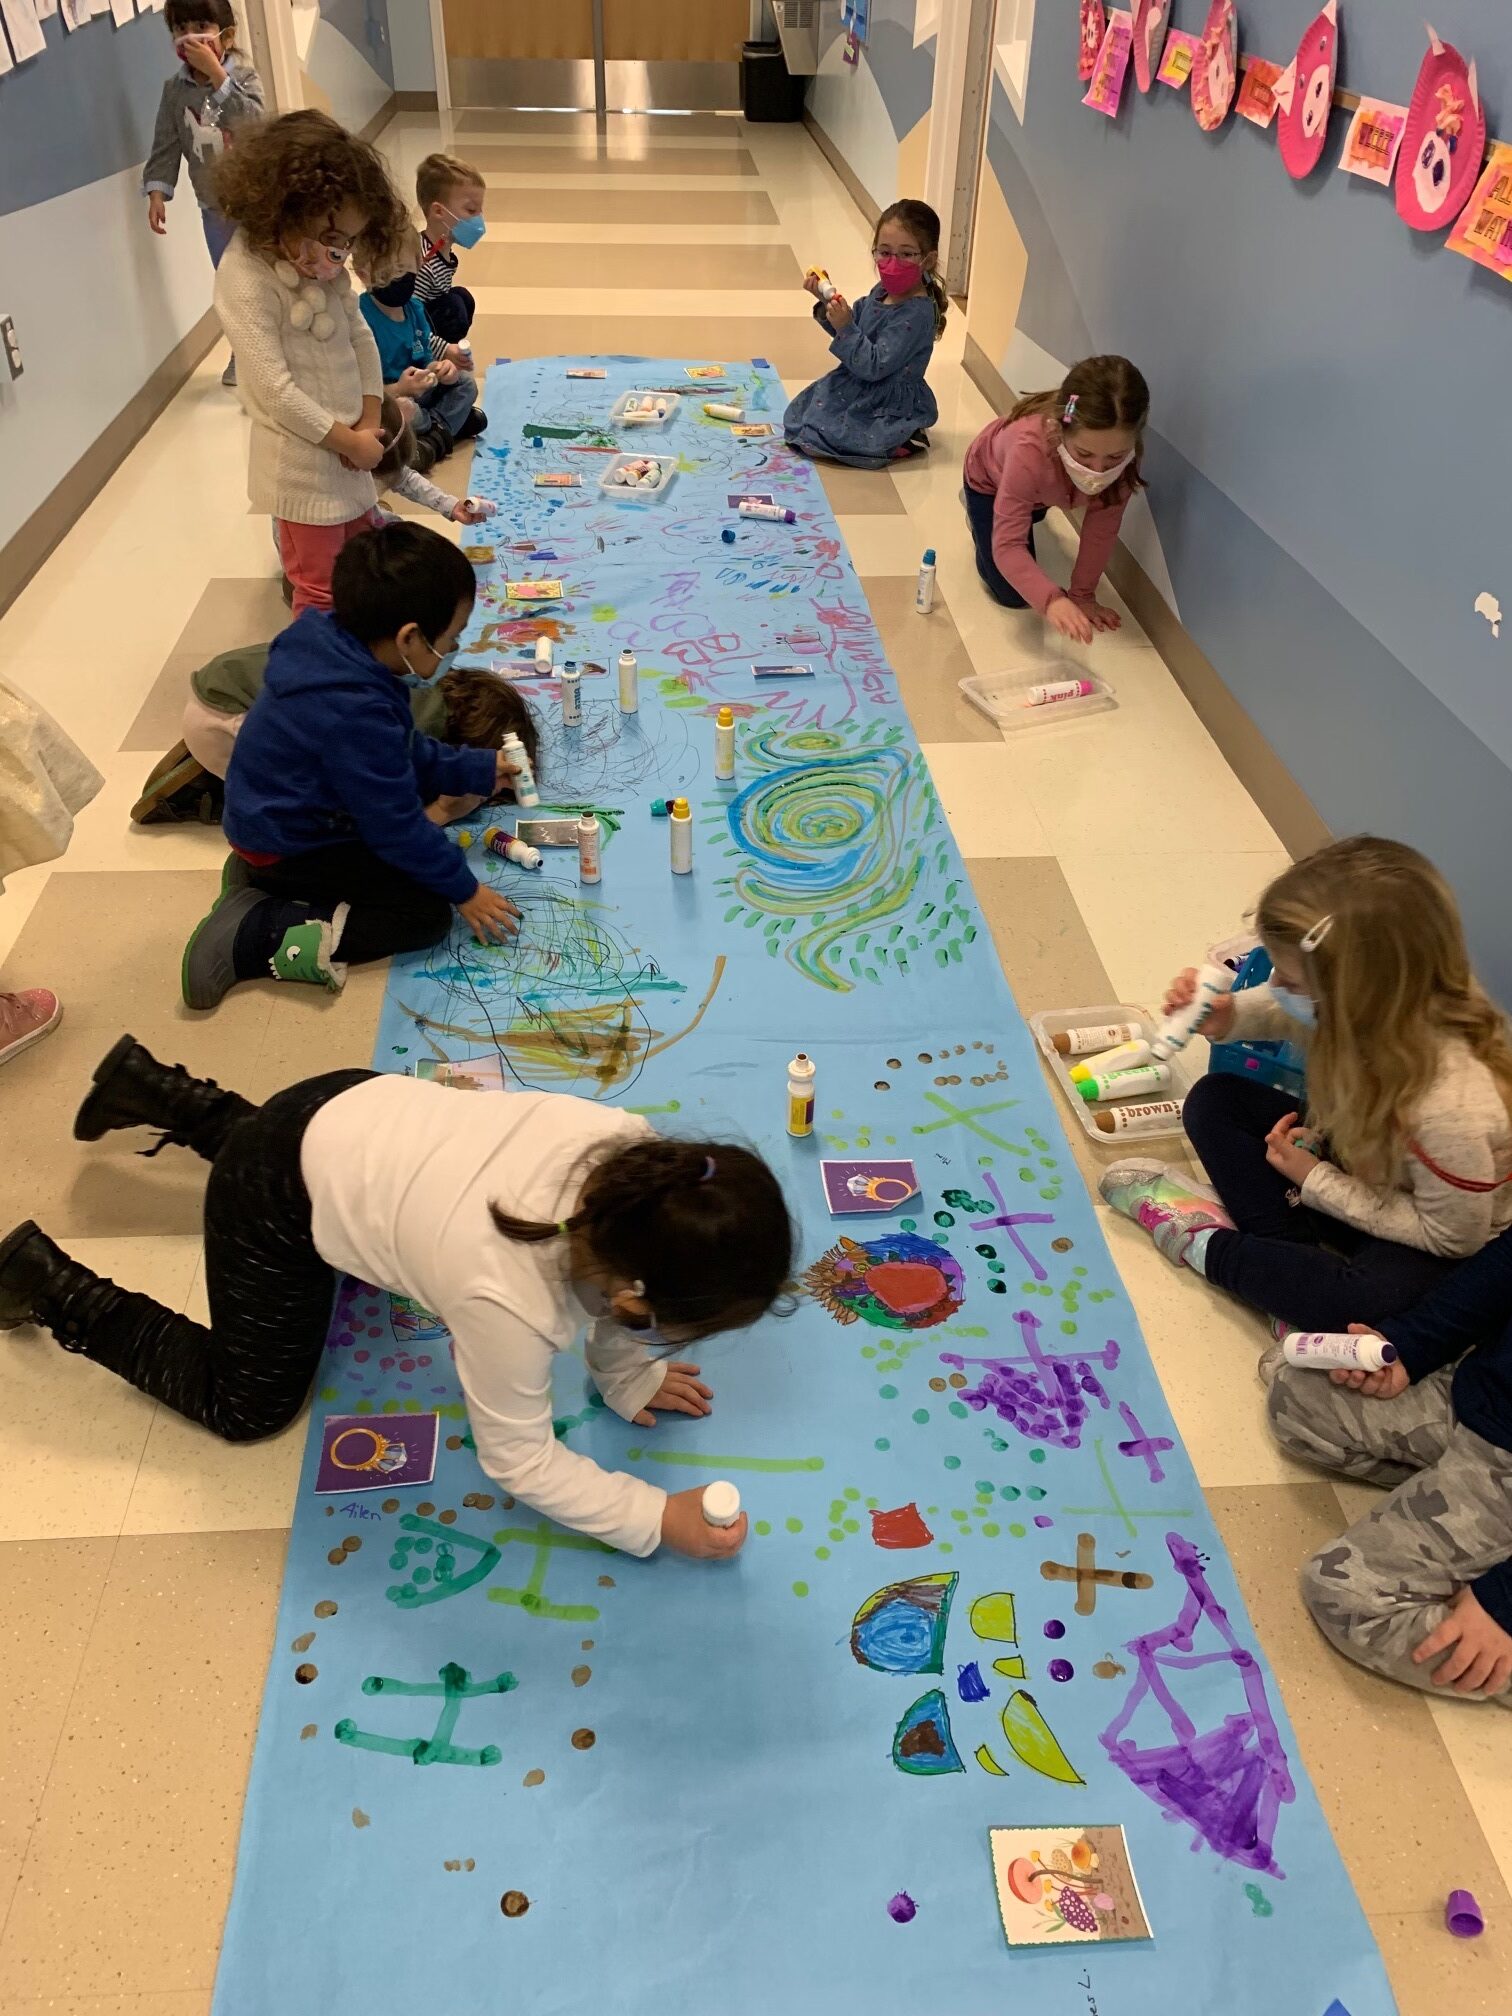 Sag Harbor's full-day free pre-kindergarten program will receive additional funding in the form of state aid for the next school year, which will help enhance programming. COURTESY SAG HARBOR SCHOOL DISTRICT